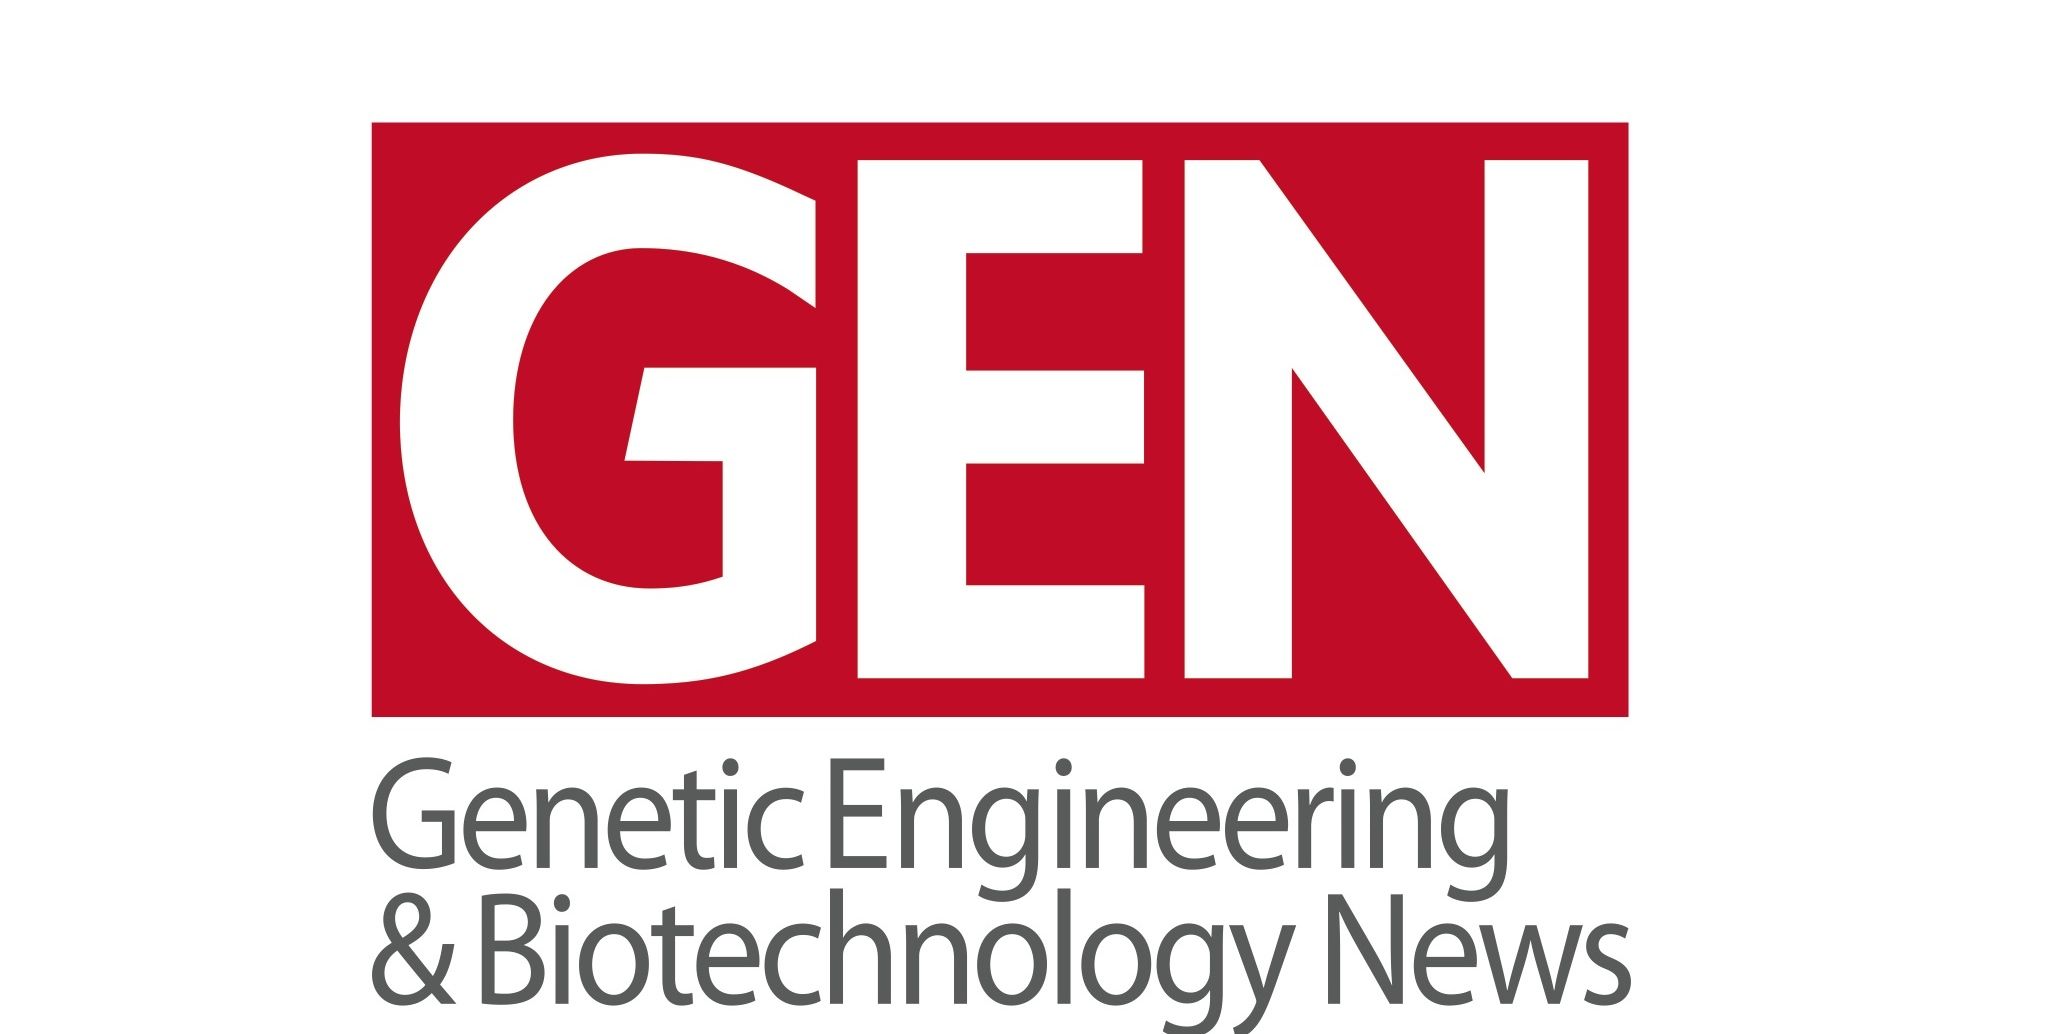 Genetic Engineering and Biotechnology News